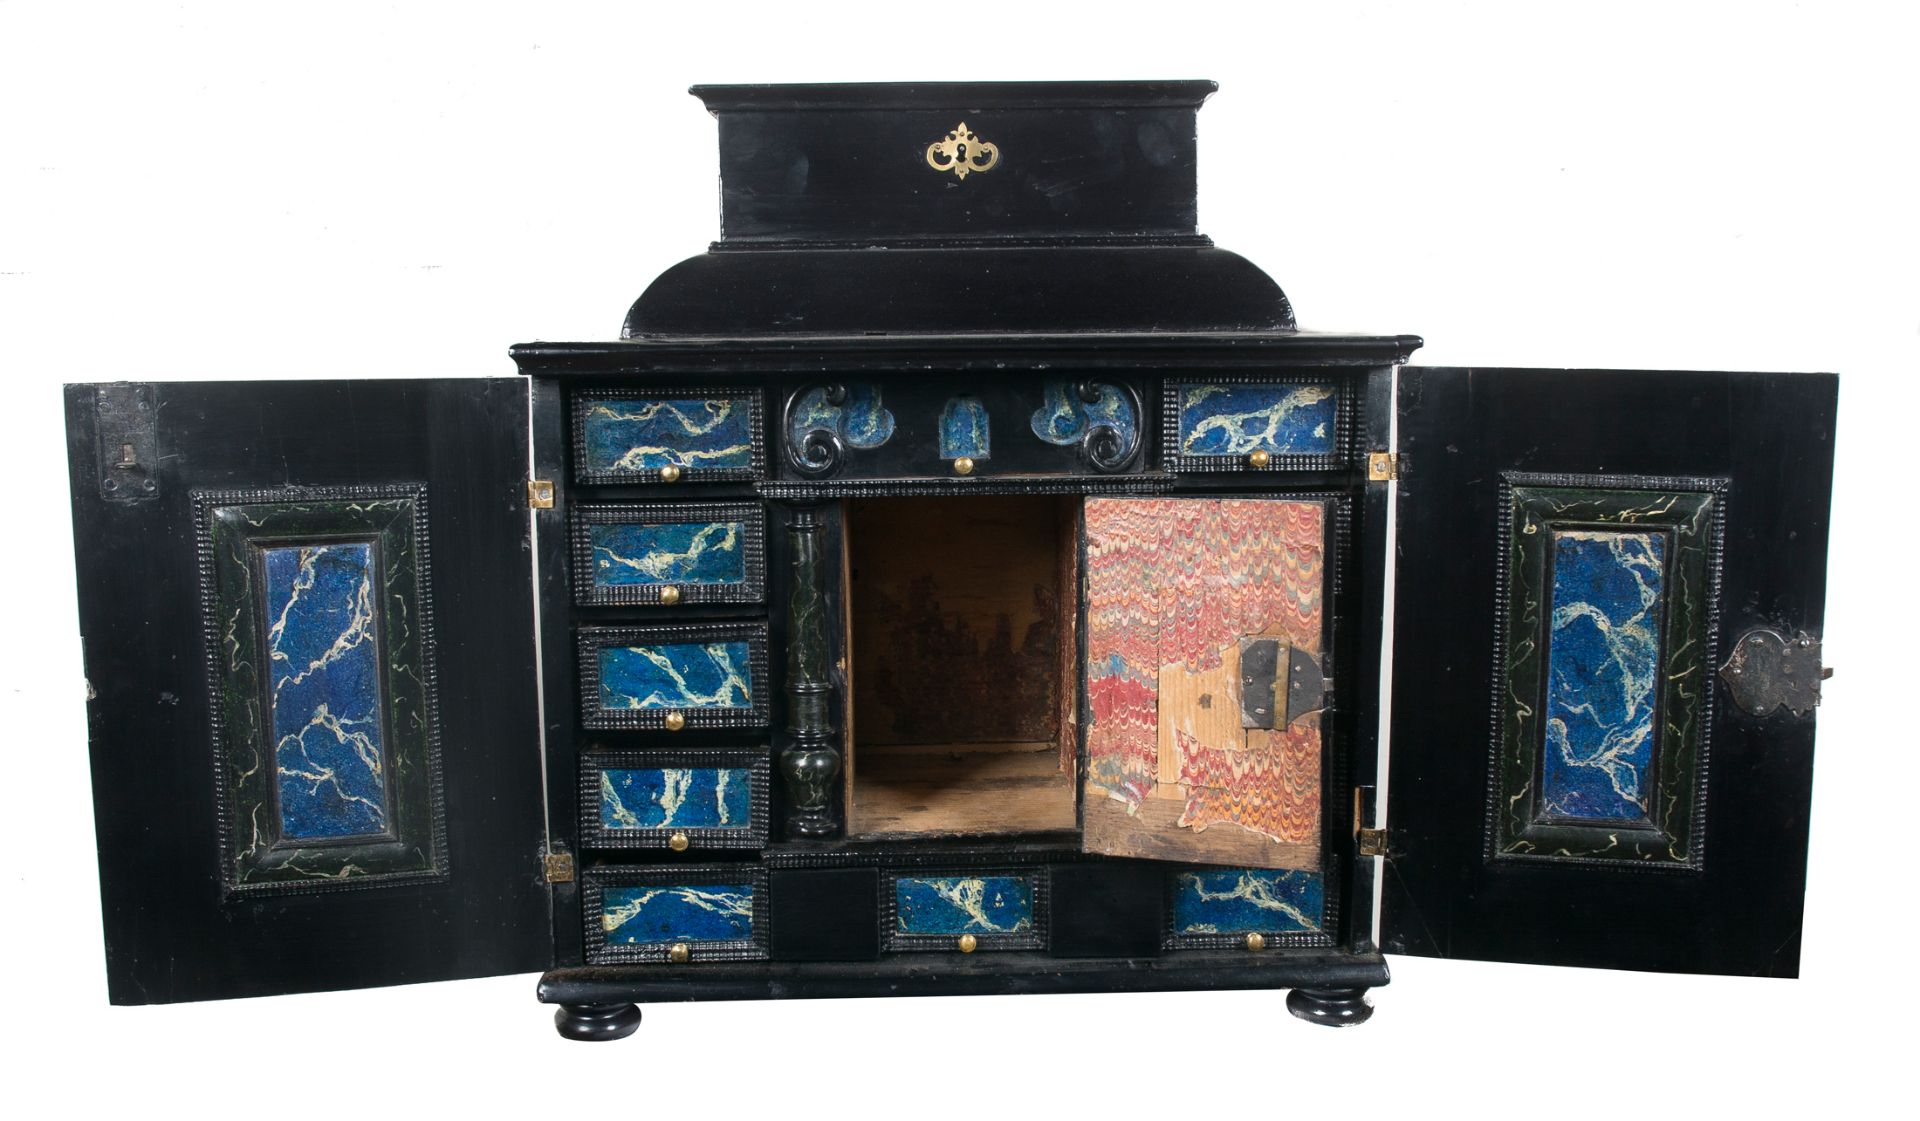 Ebonised and marbled small wooden chest. Flemish workshop. 17th - 18th century. - Image 3 of 3